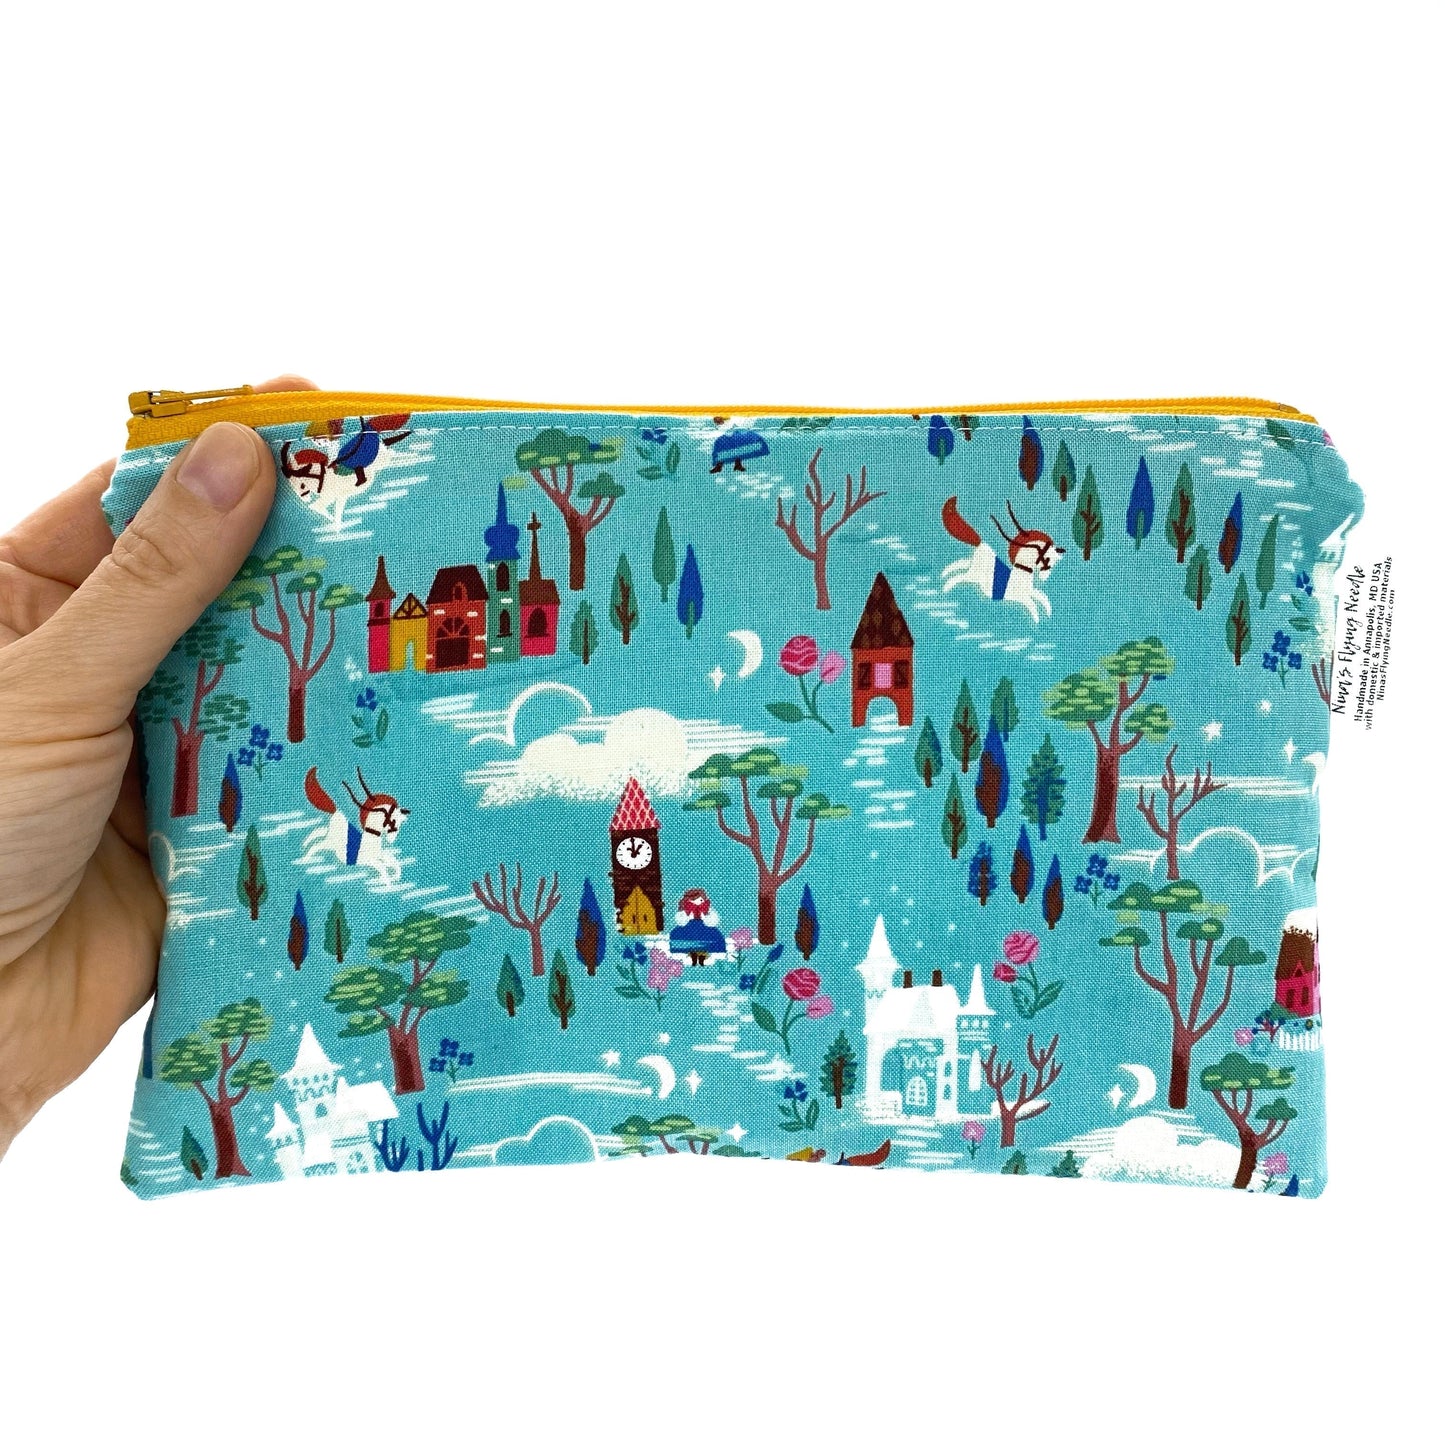 Snack Sized Reusable Zippered Bag Bumbling Bees Smiling